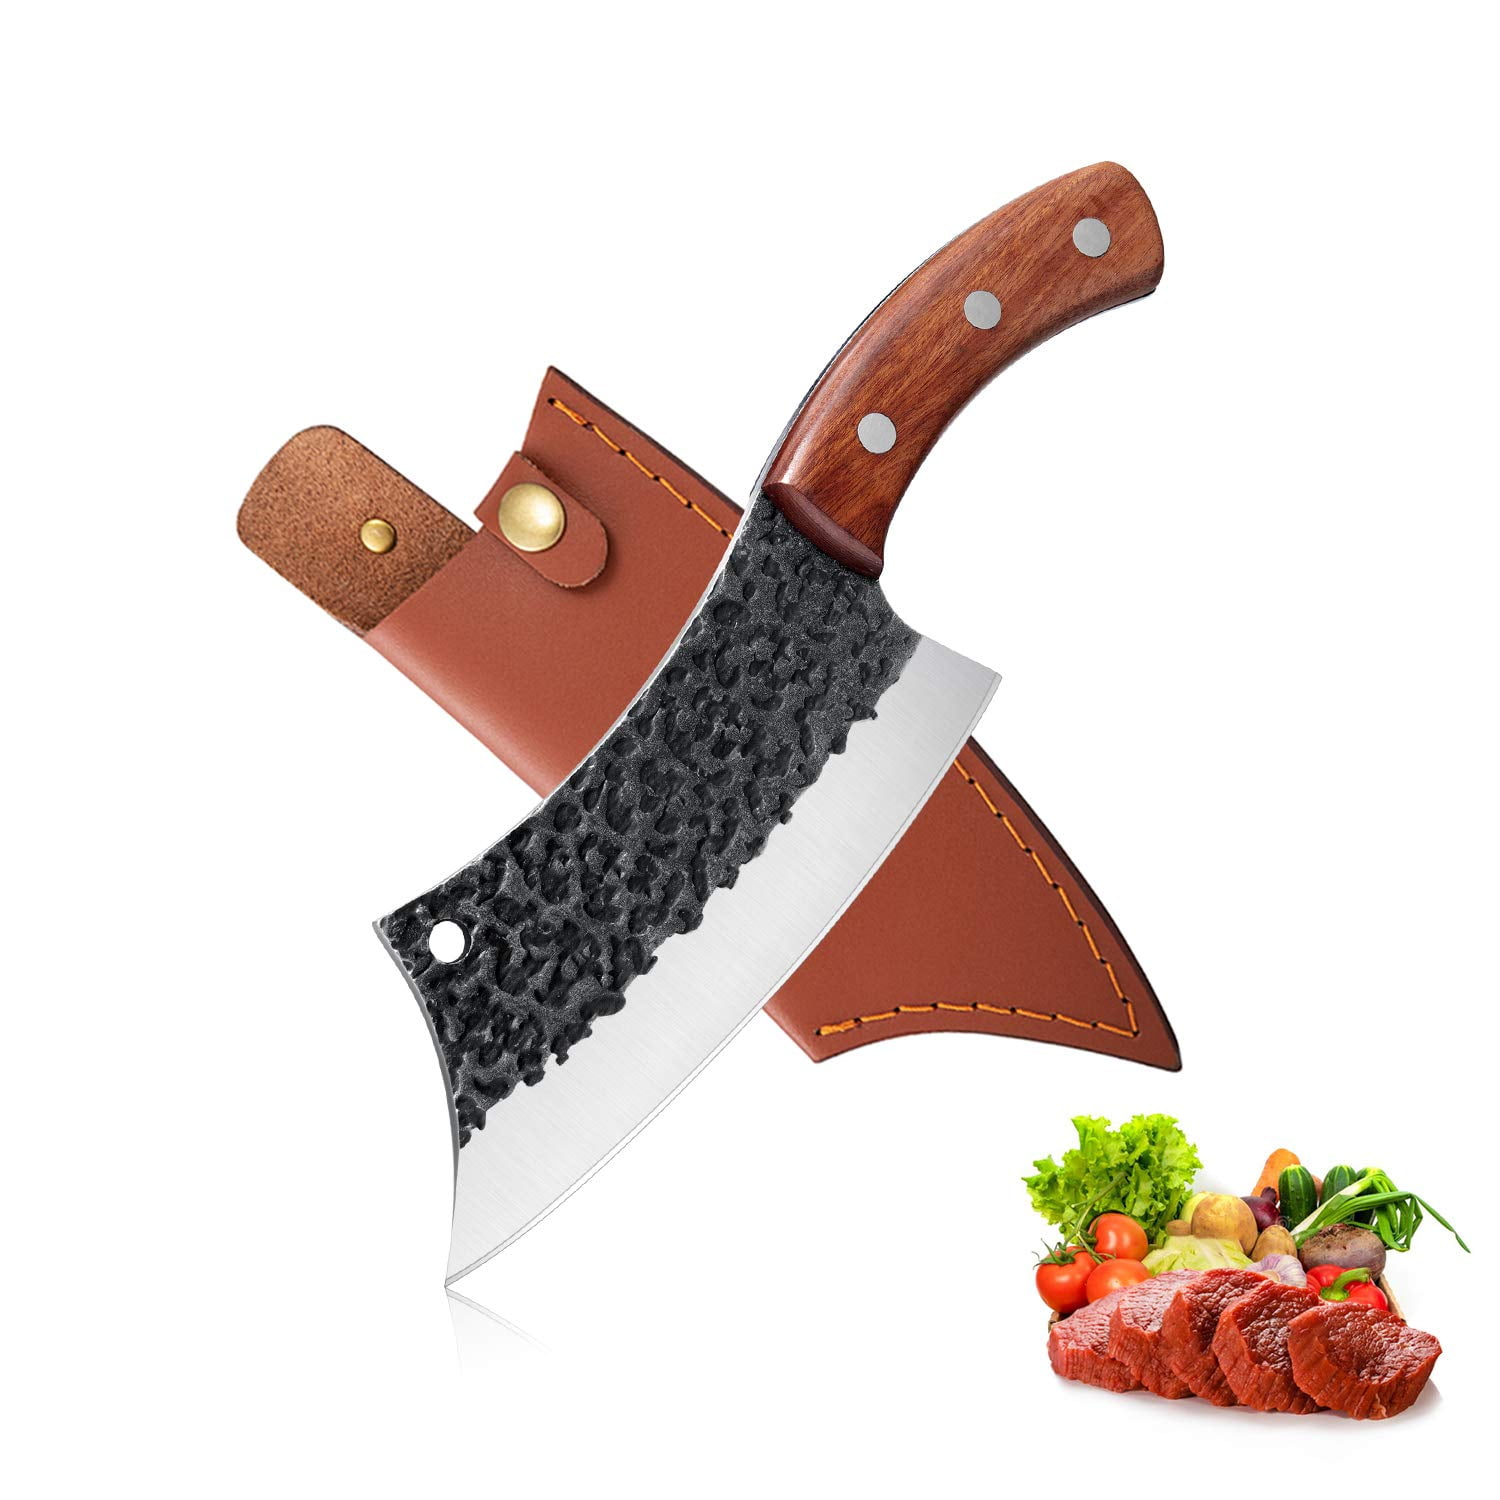 Kitory Big Boning Knife, Hand forged multi purpose cleaver kitchen chef  butcher knife, Full-tang Chopping knife with Copper Rivets for